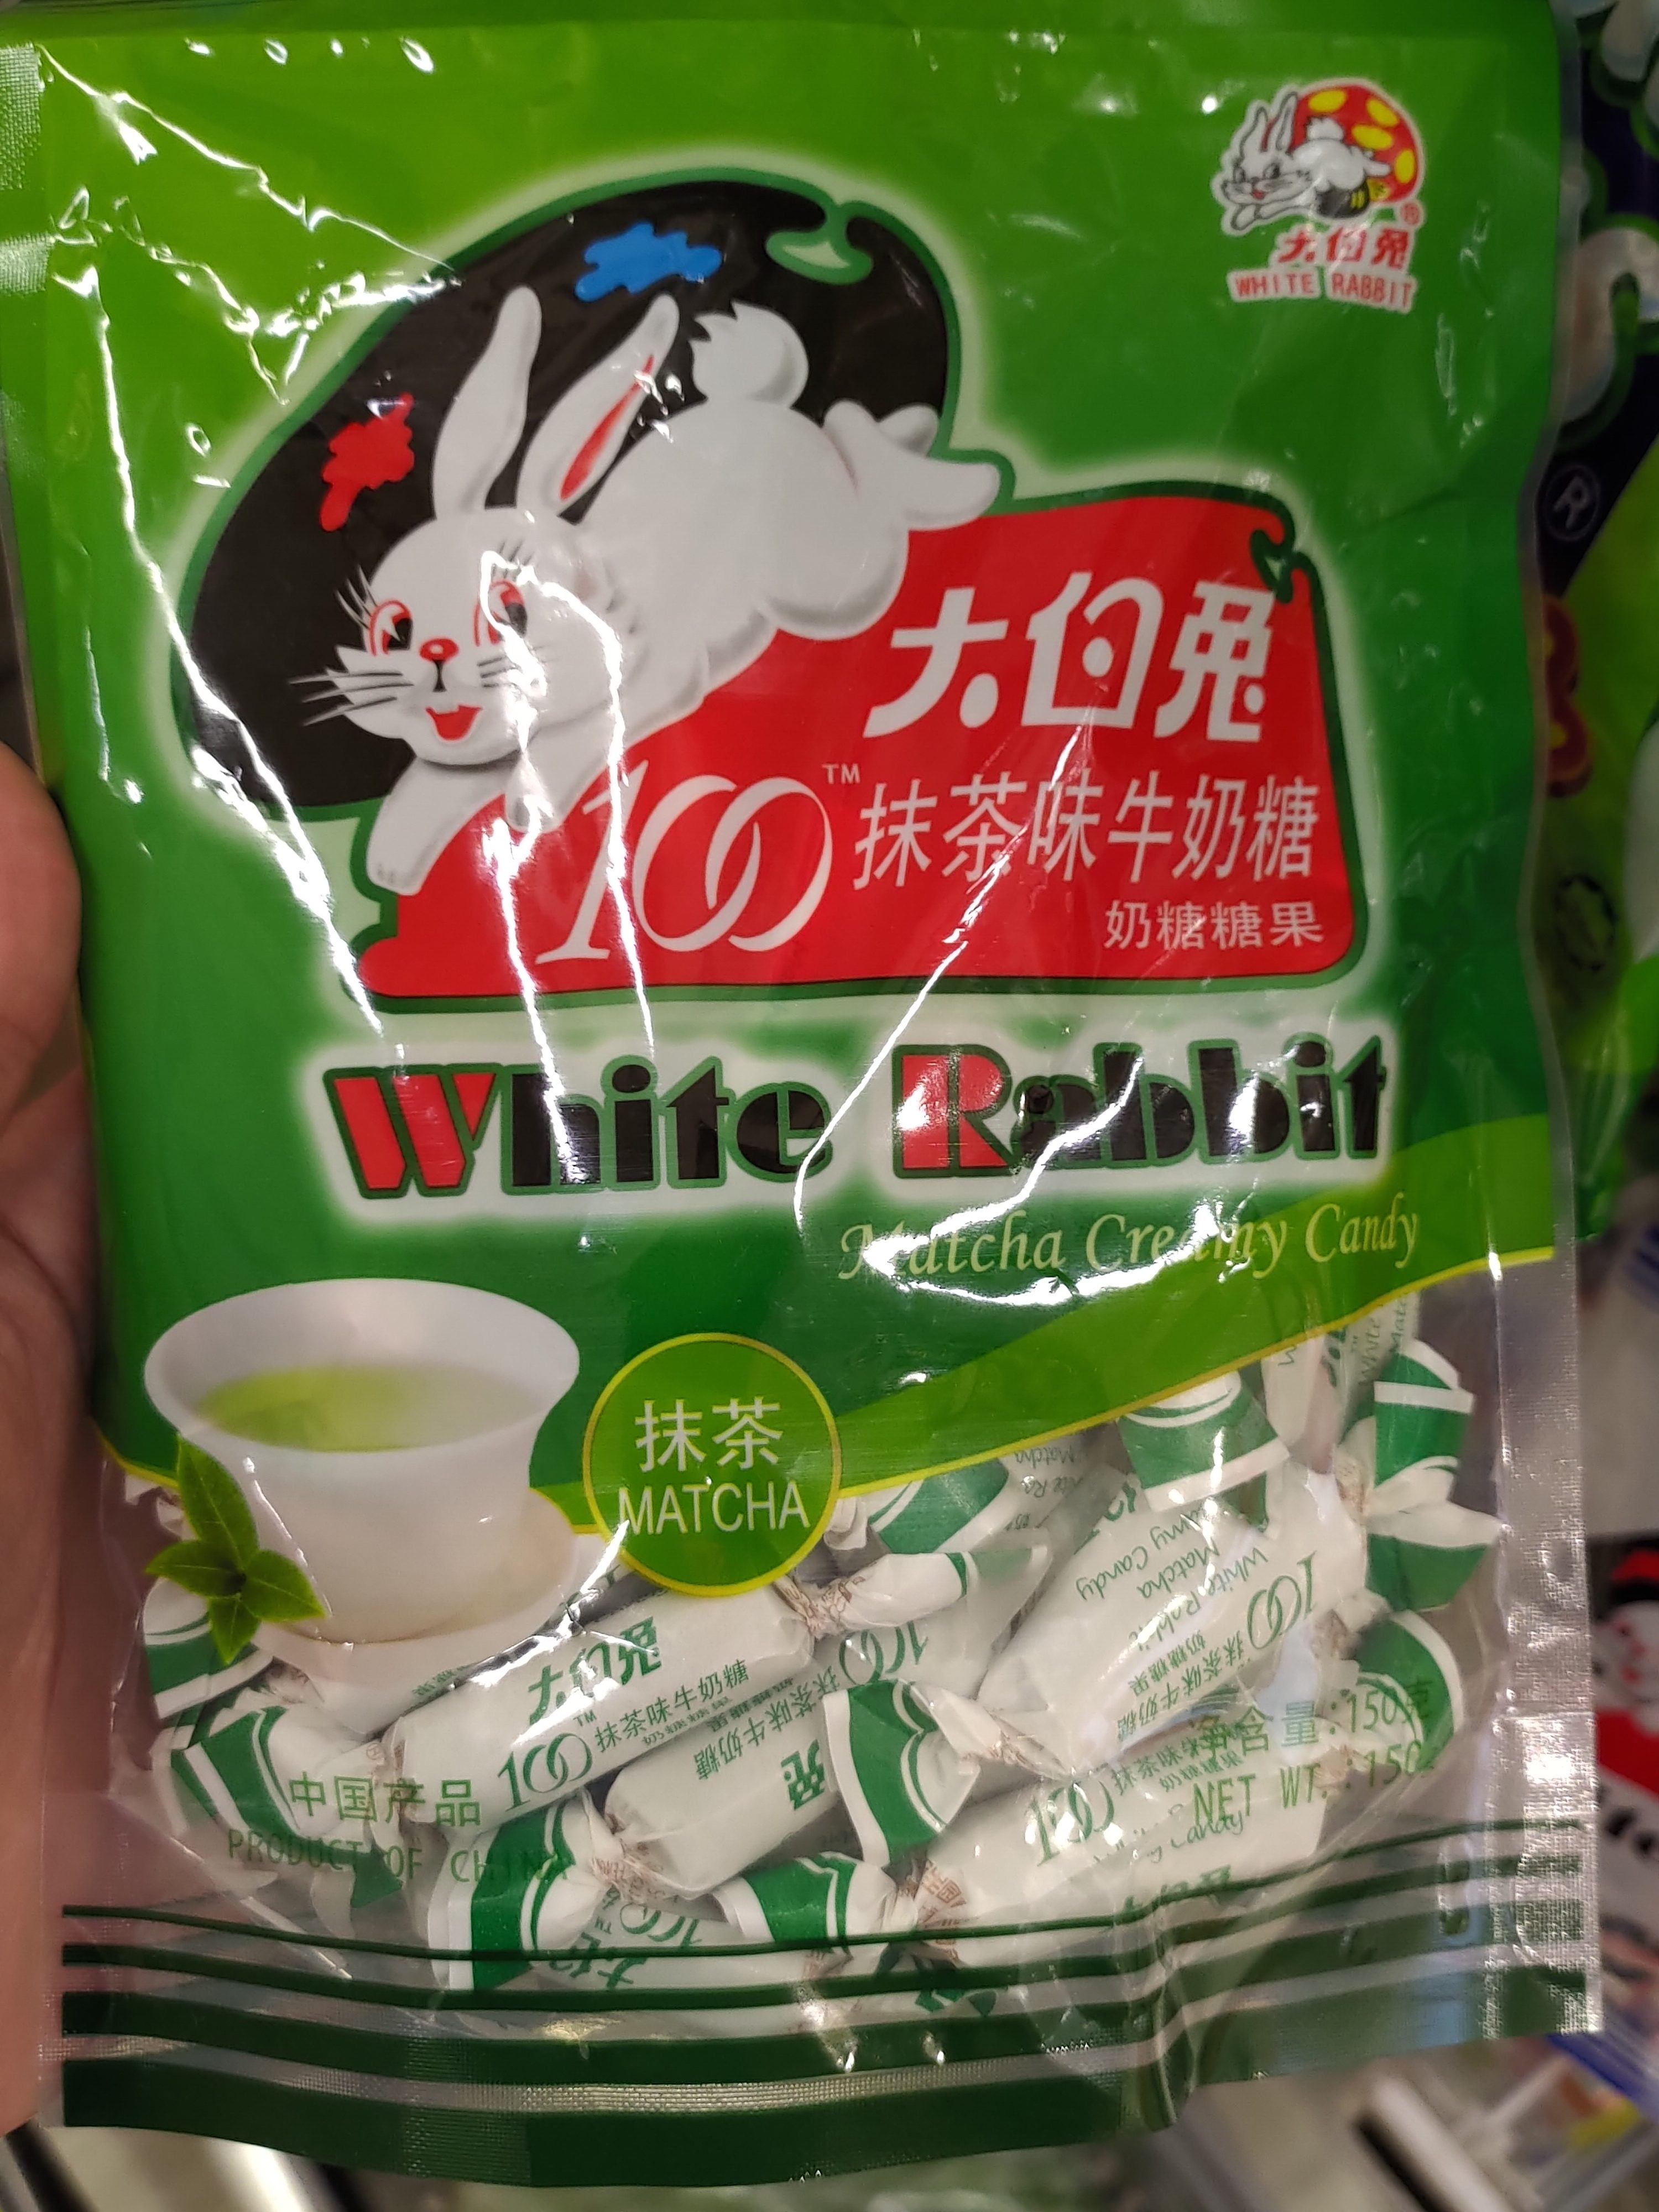 White Rabbit Candy now available in Matcha and Chocolate flavours, and can be found at selected FairPrice - 3